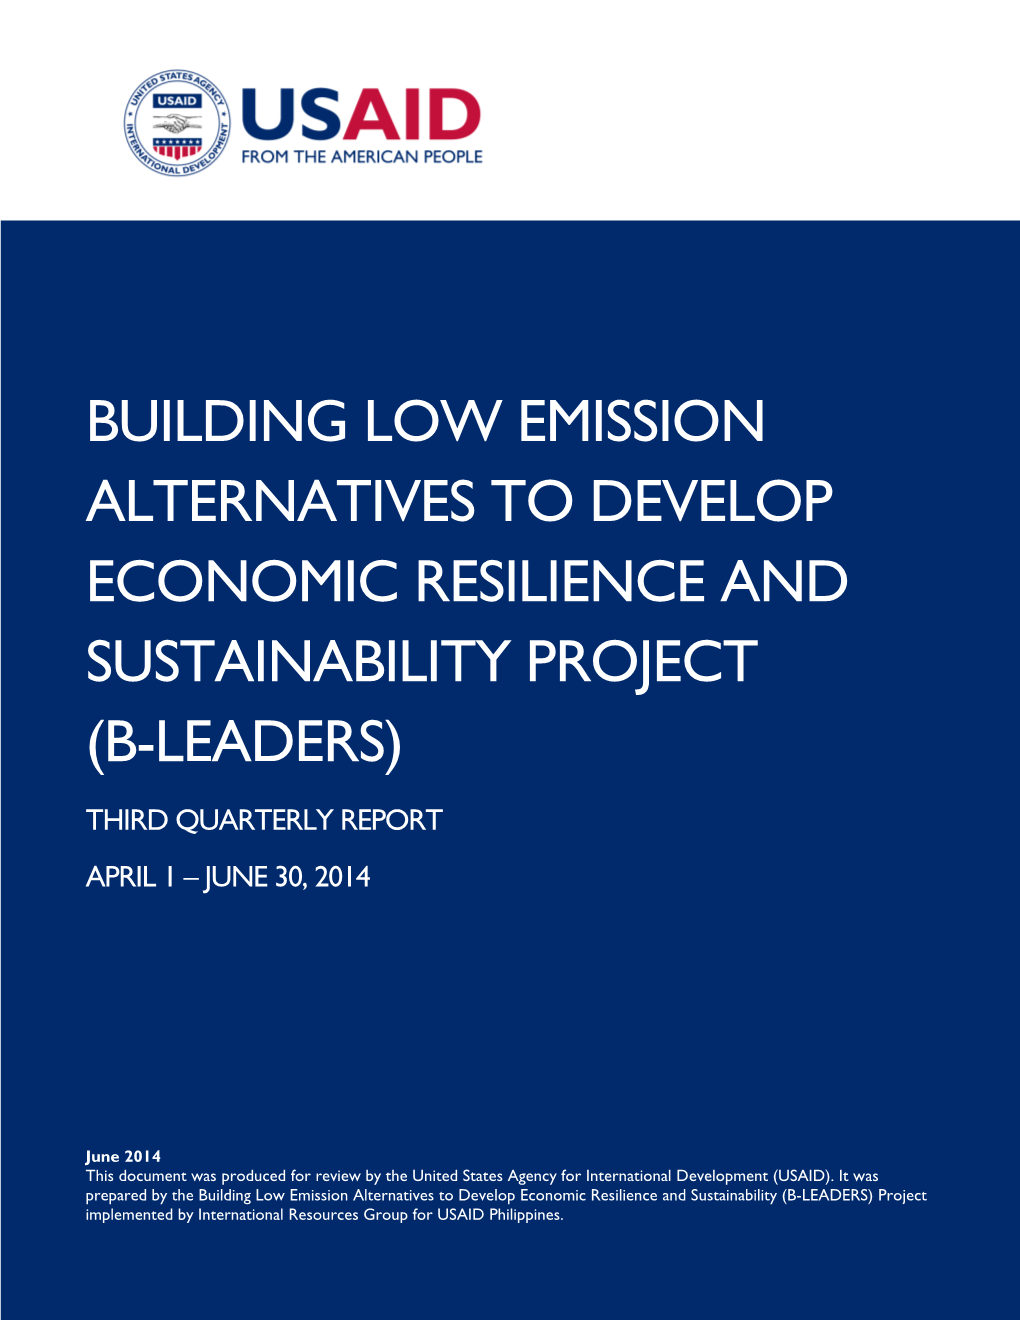 Building Low Emission Alternatives to Develop Economic Resilience and Sustainability Project (B-Leaders)